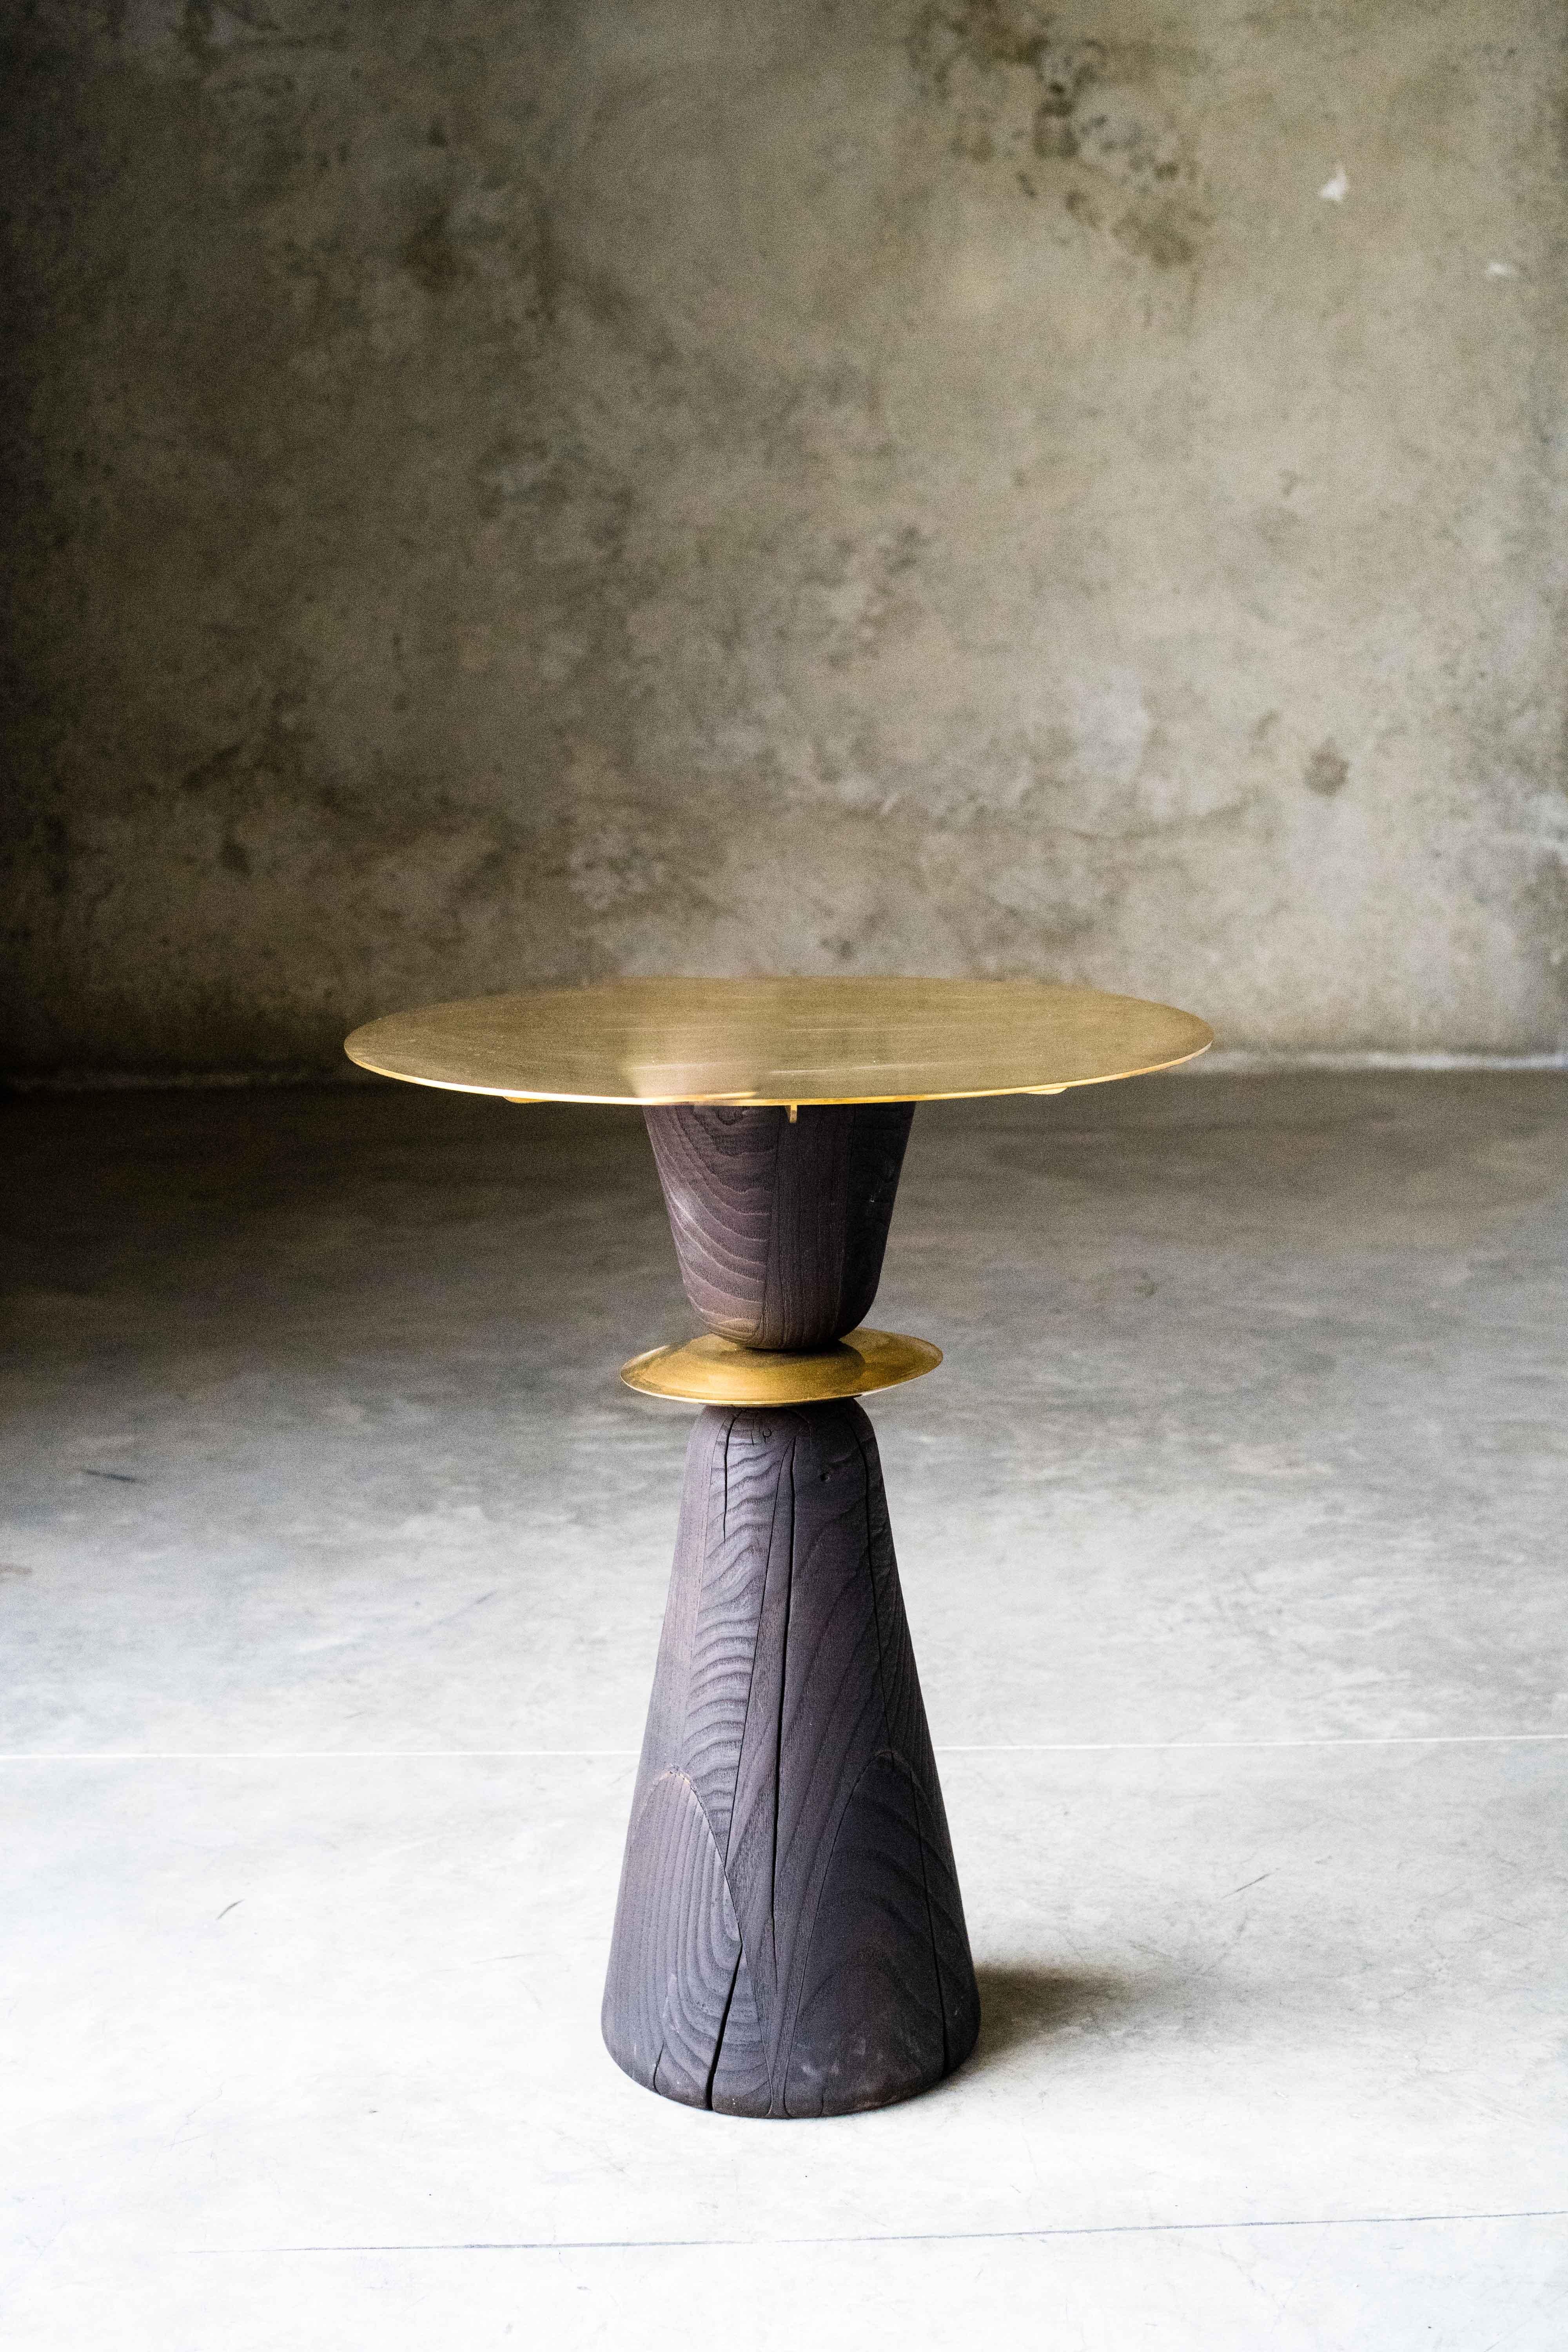 WMF small table by MOB
Limited editions of 5 + 1 prototype
Designer: Alejandra Prieto and Pablo Valle (Chile)
Dimensions: H 72 x W 70 cm
Material: Polished bronze, Chestnut wood, Shou-Sugi-Ban (Yakisugi) treatment

The WMF is a small pedestal